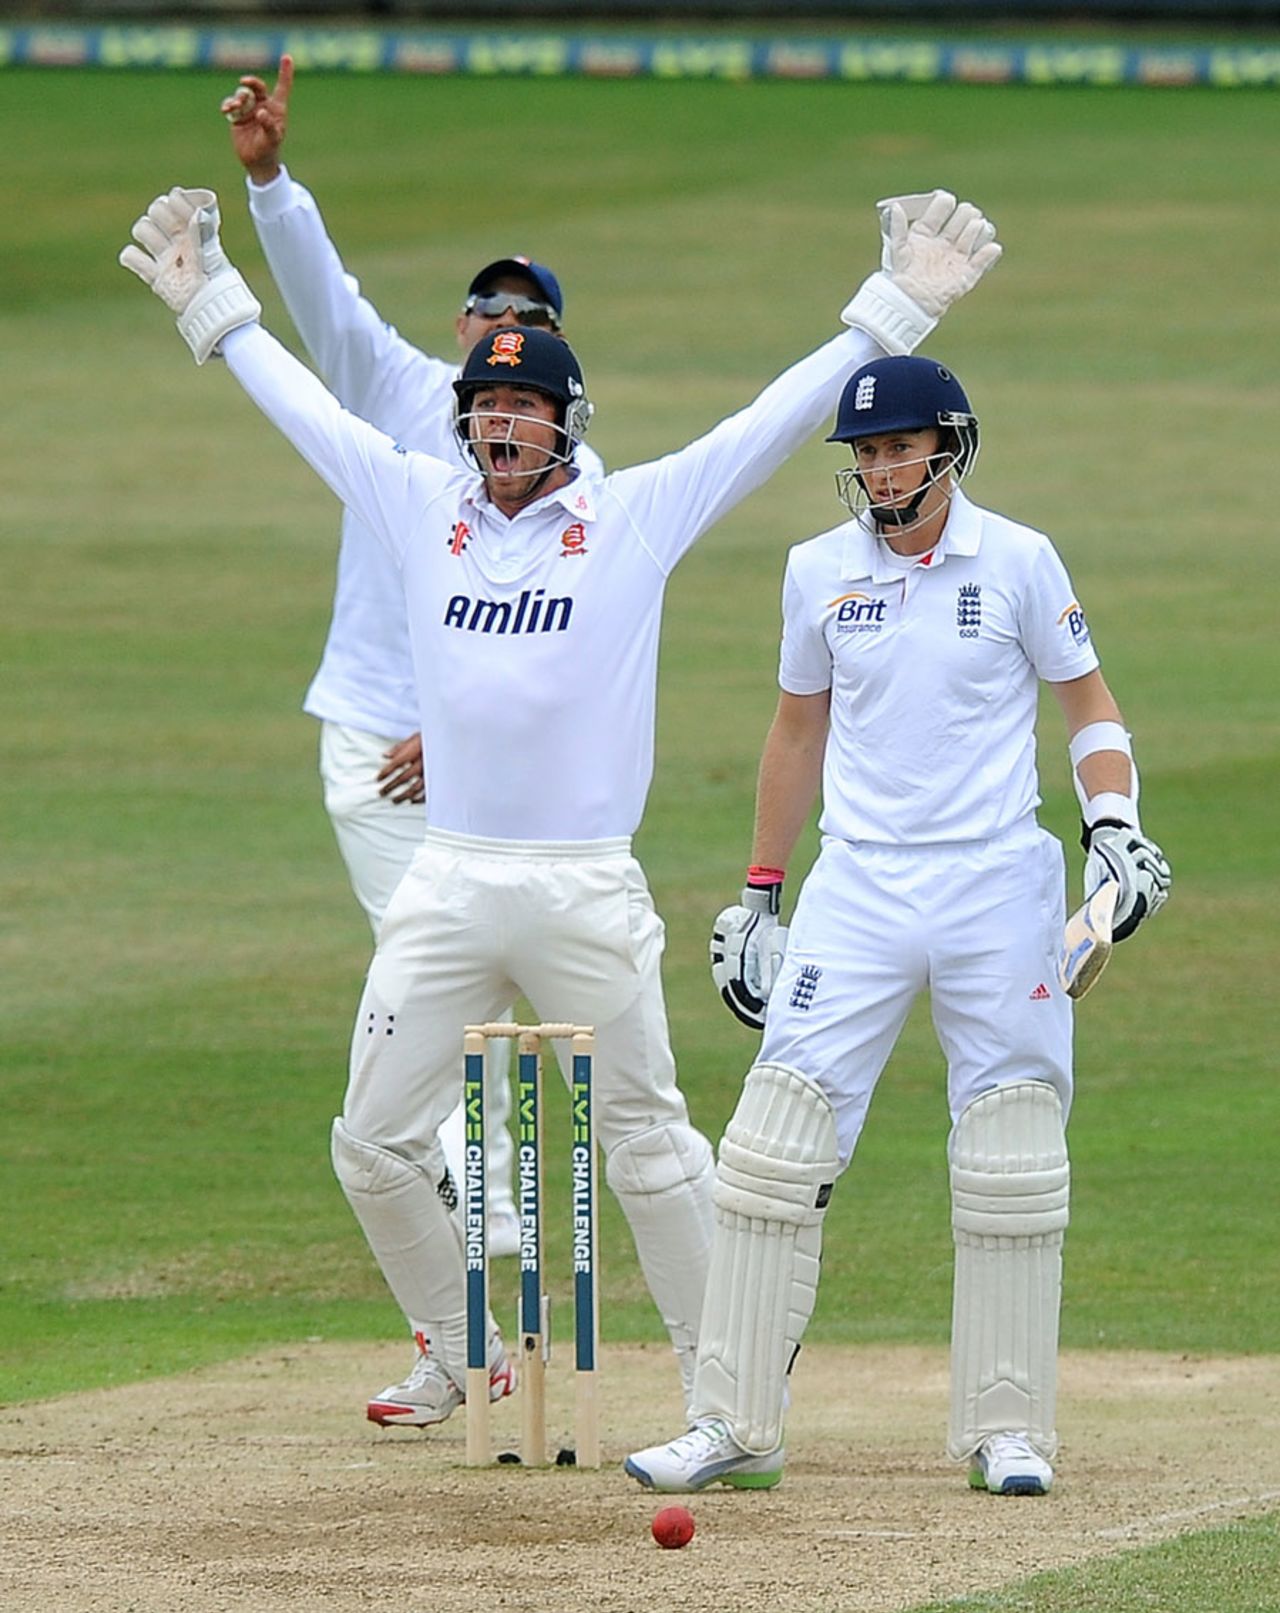 Ben Foakes goes up for the wicket of Joe Root, Essex v England, 3rd day, Chelmsford, July 2, 2013